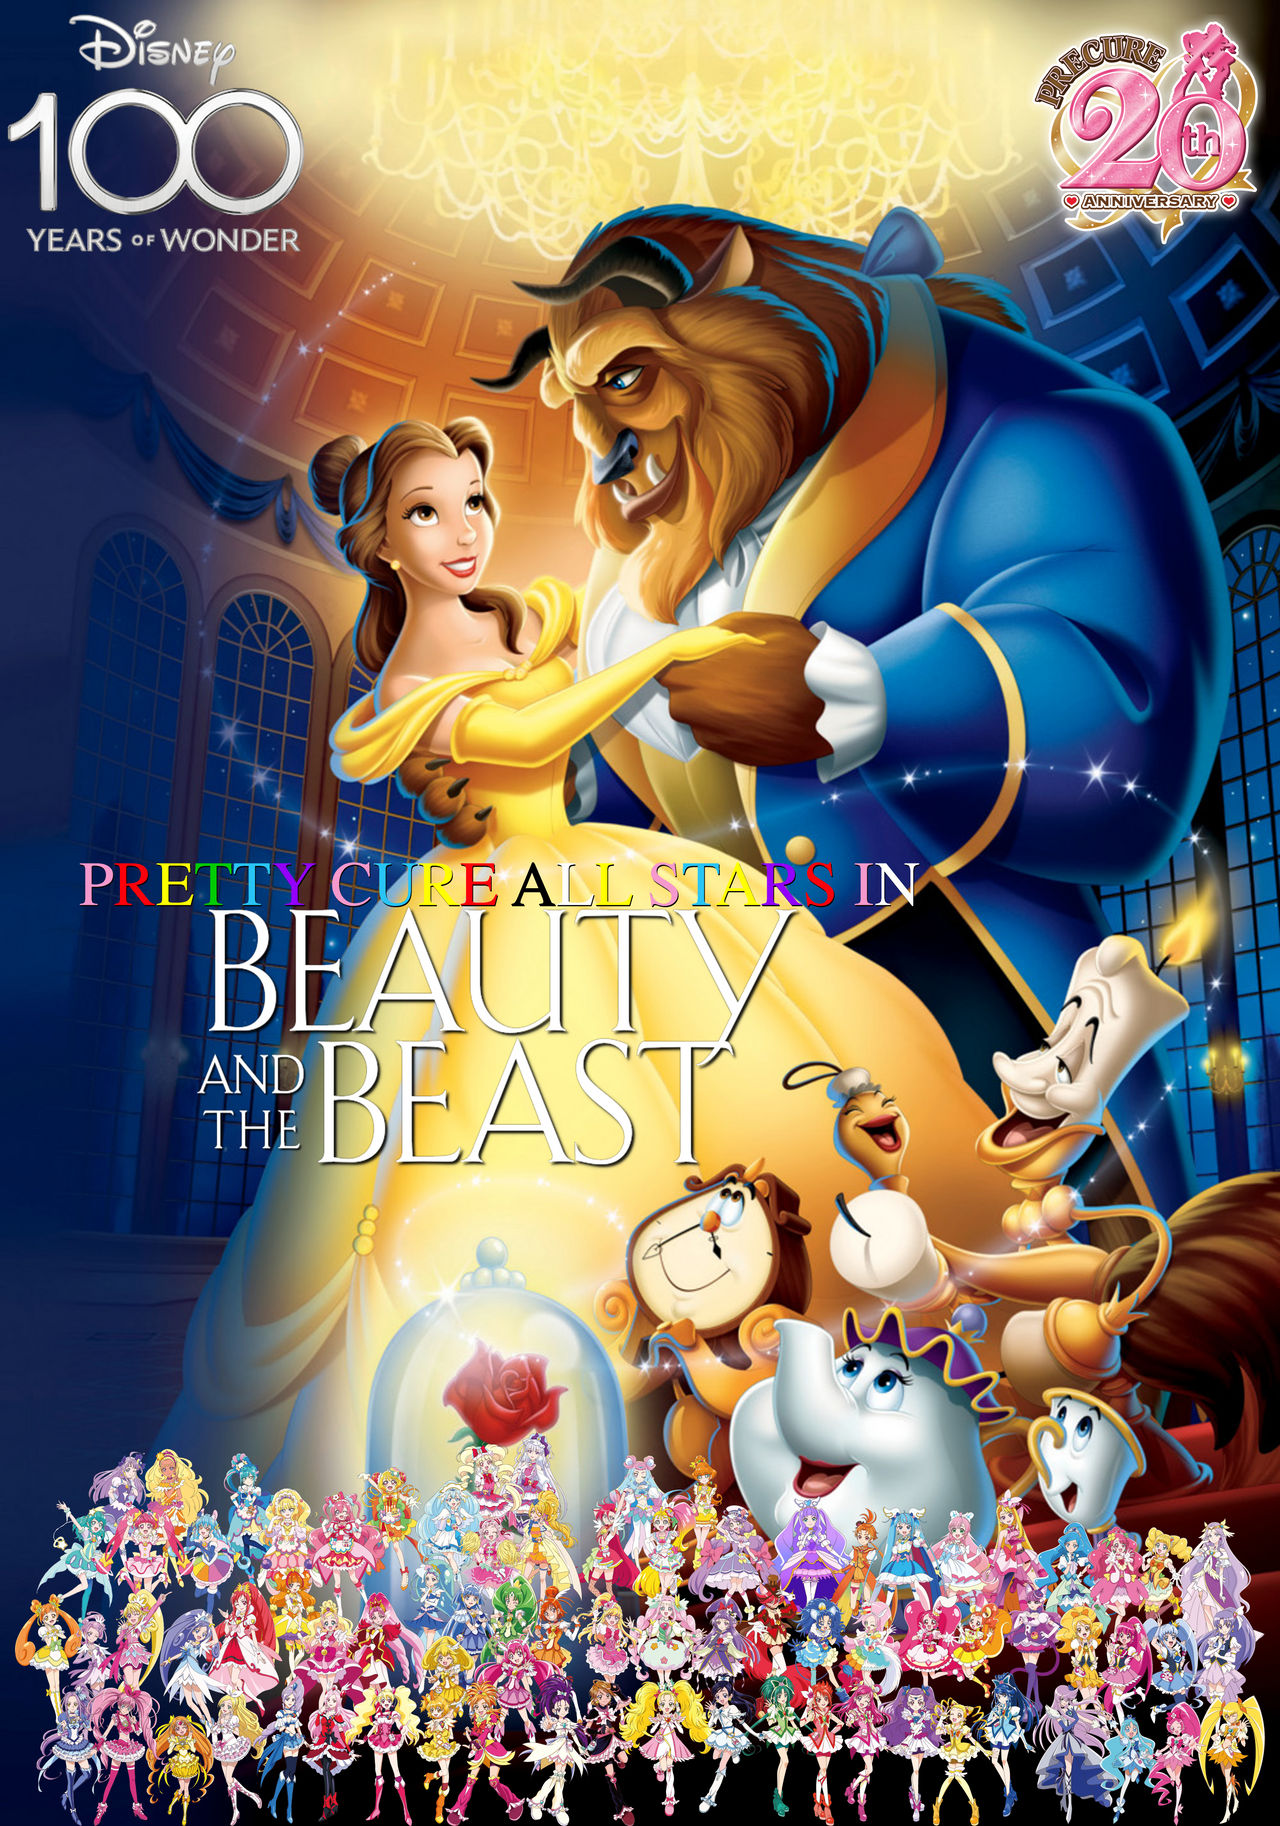 Wonder - The Beauty in the Beast